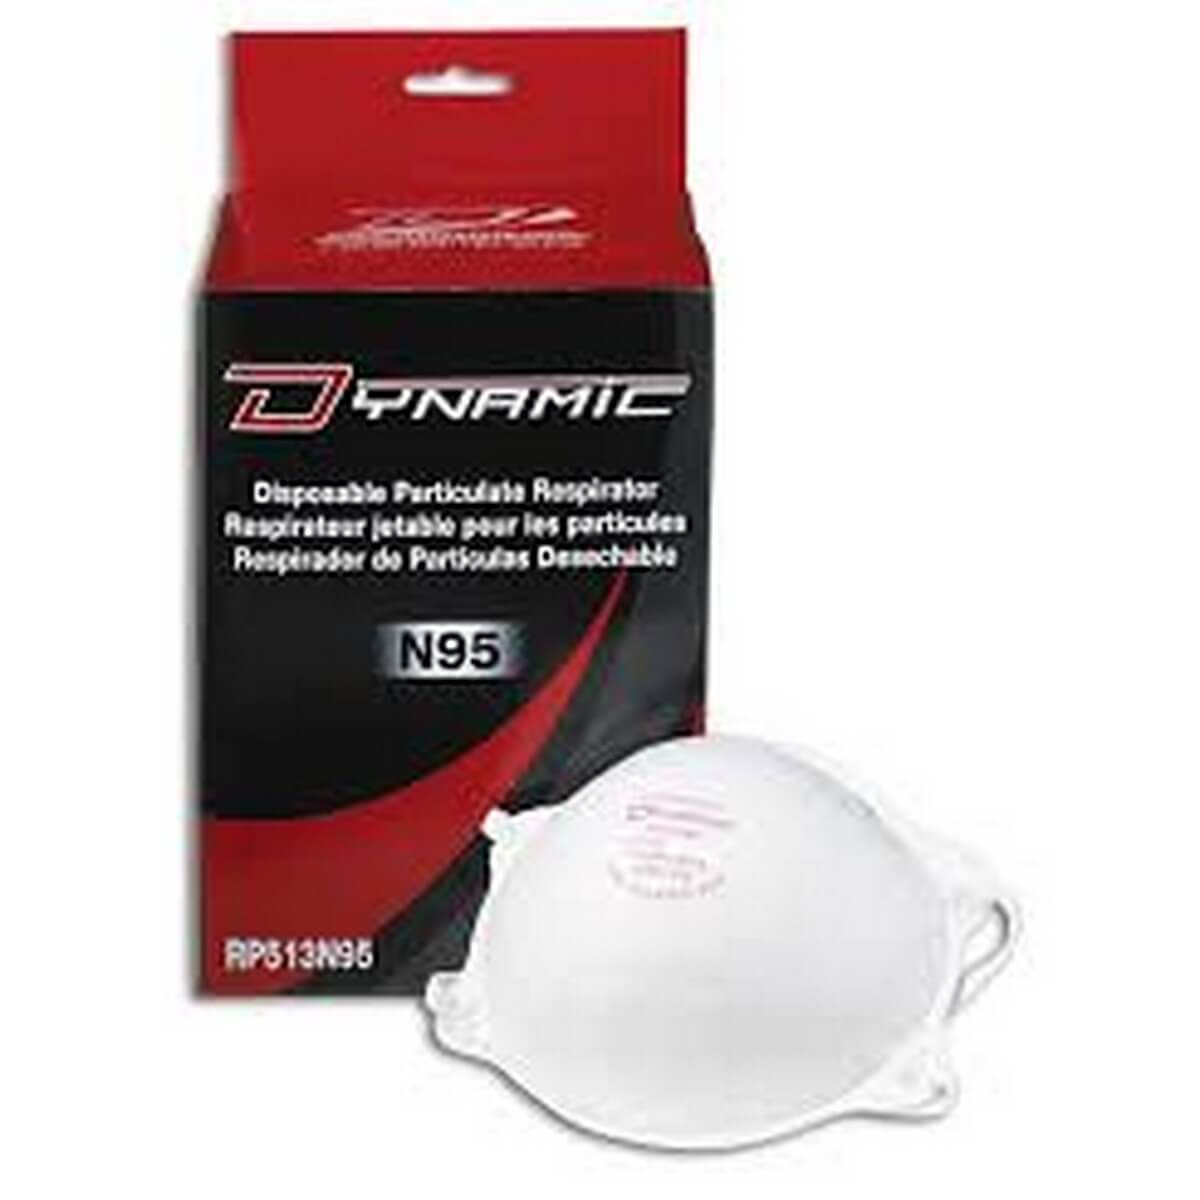 Dynamic RP513N95 - RESPIRATOR DISP. PARTICULATE  N95 - wise-line-tools